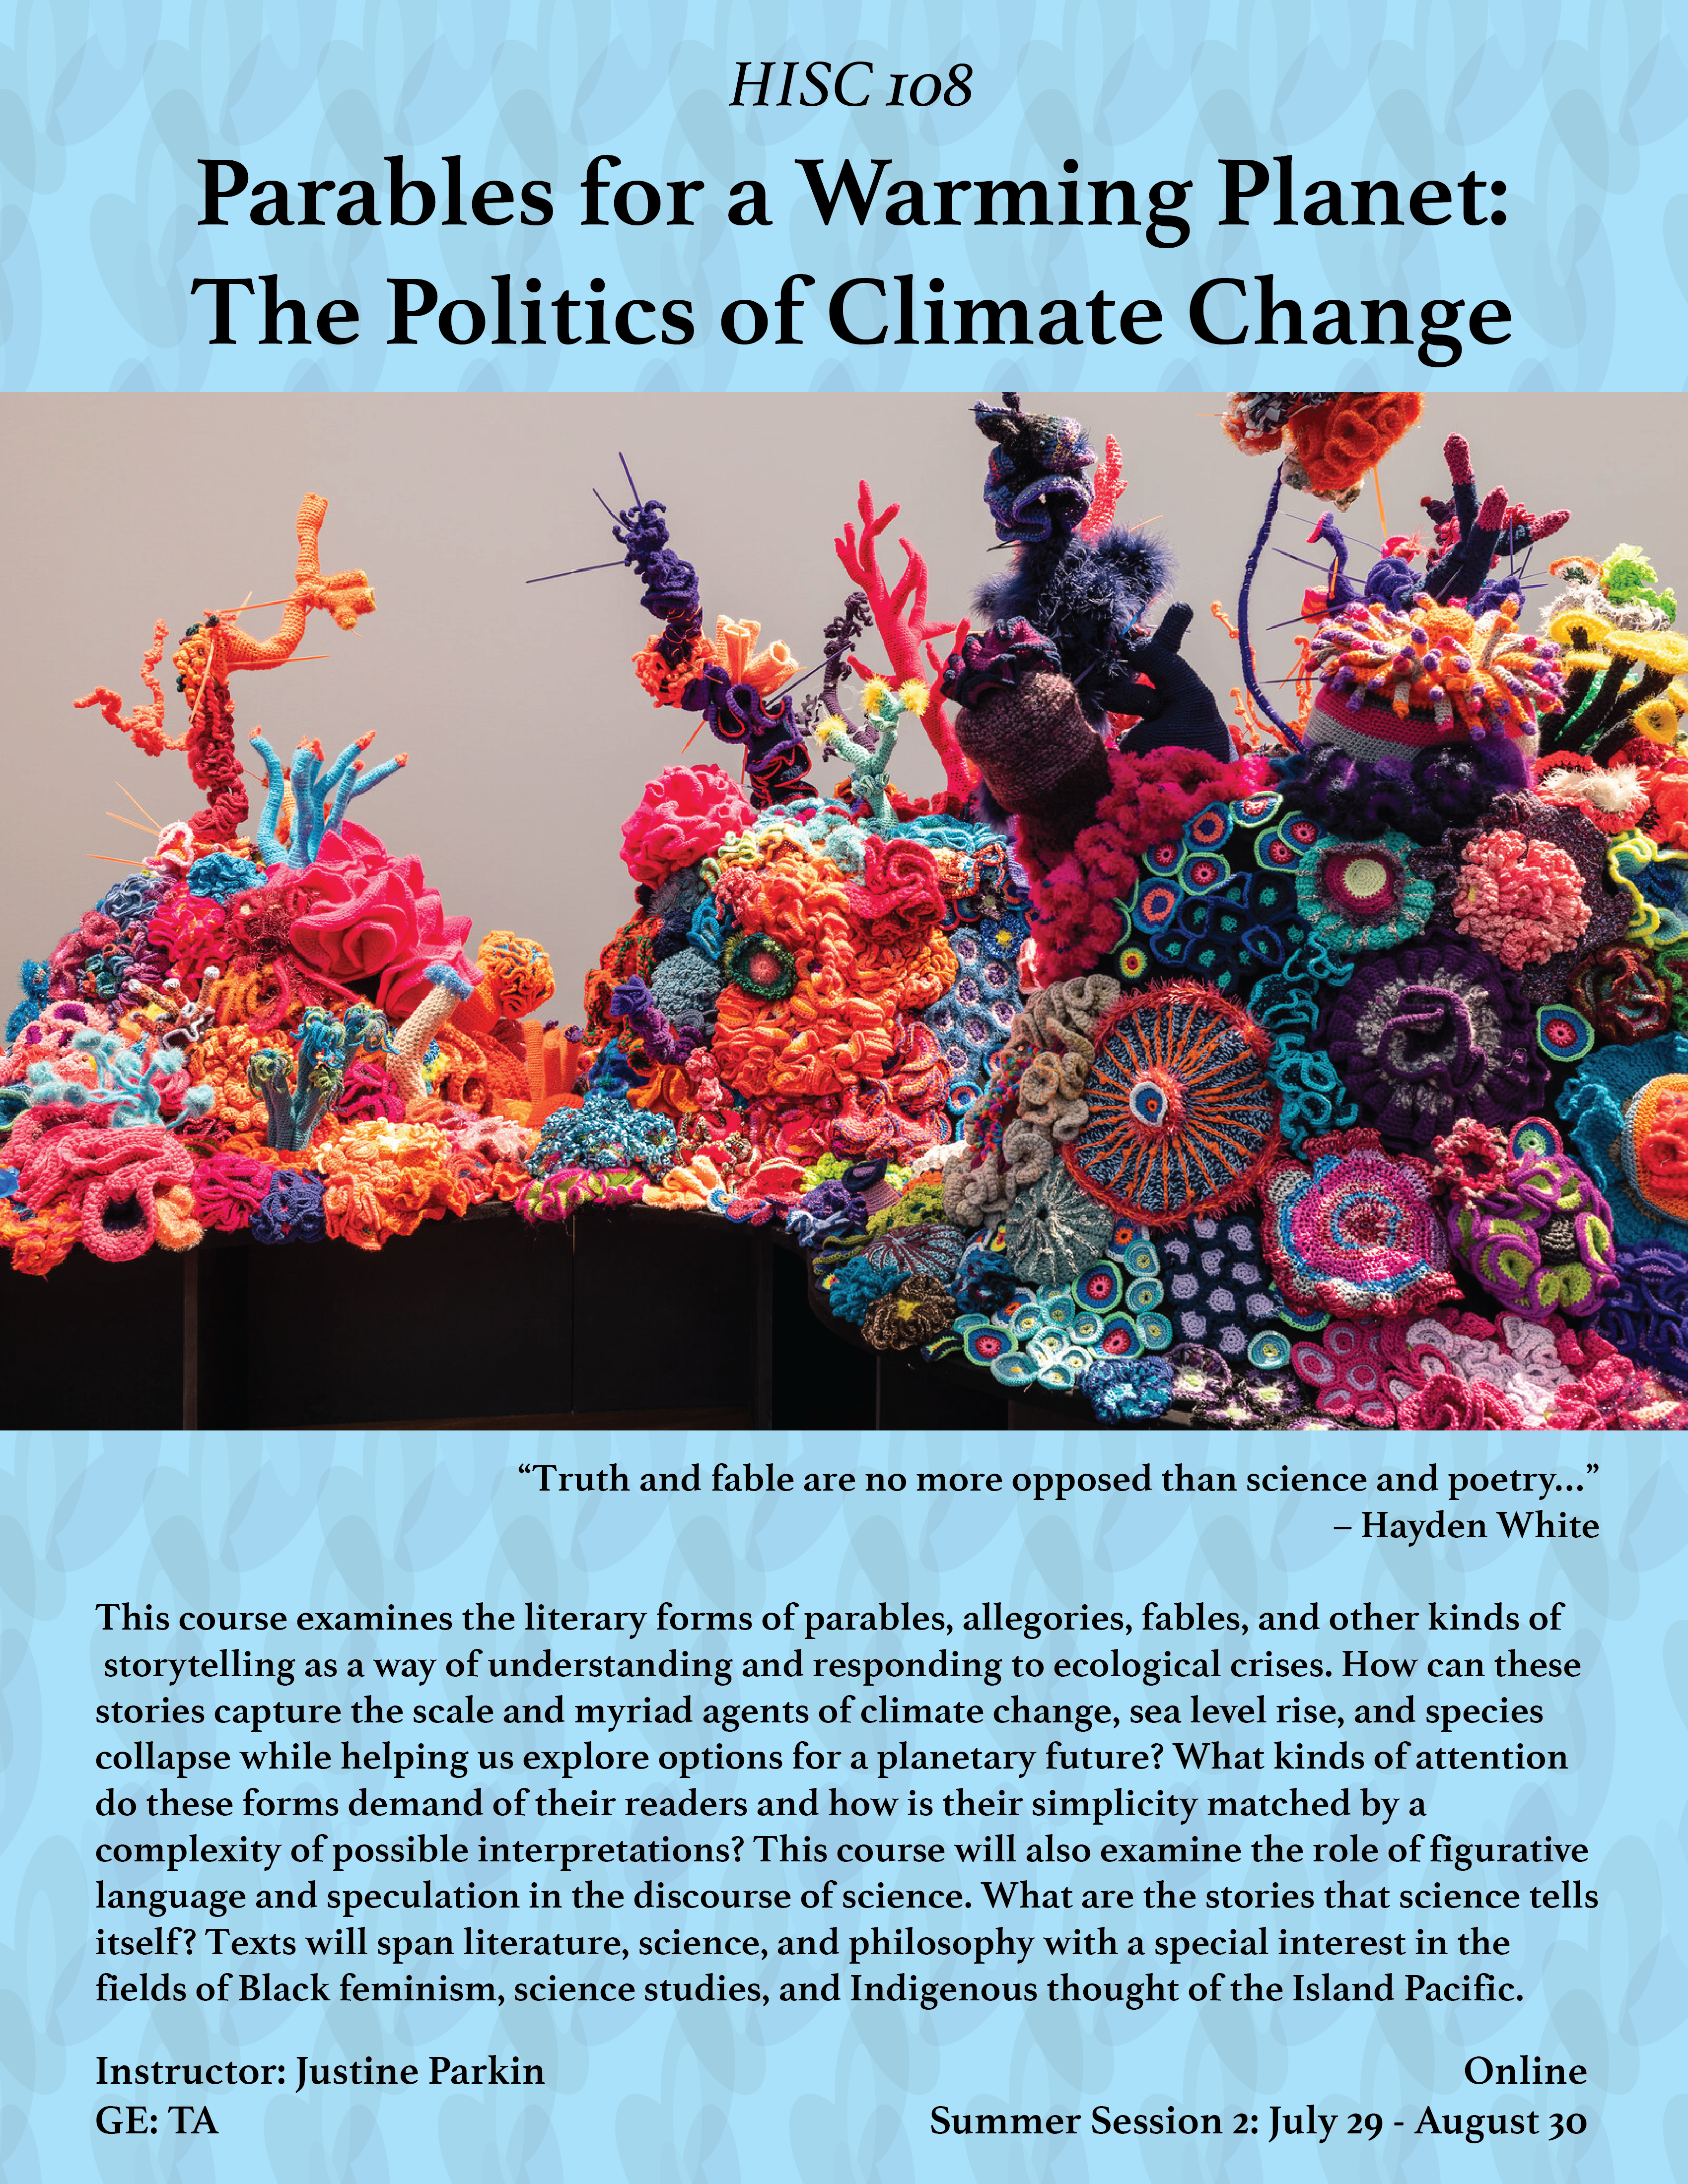 HISC 108: Parables for a Warming Planet: The Politics of Climate Change